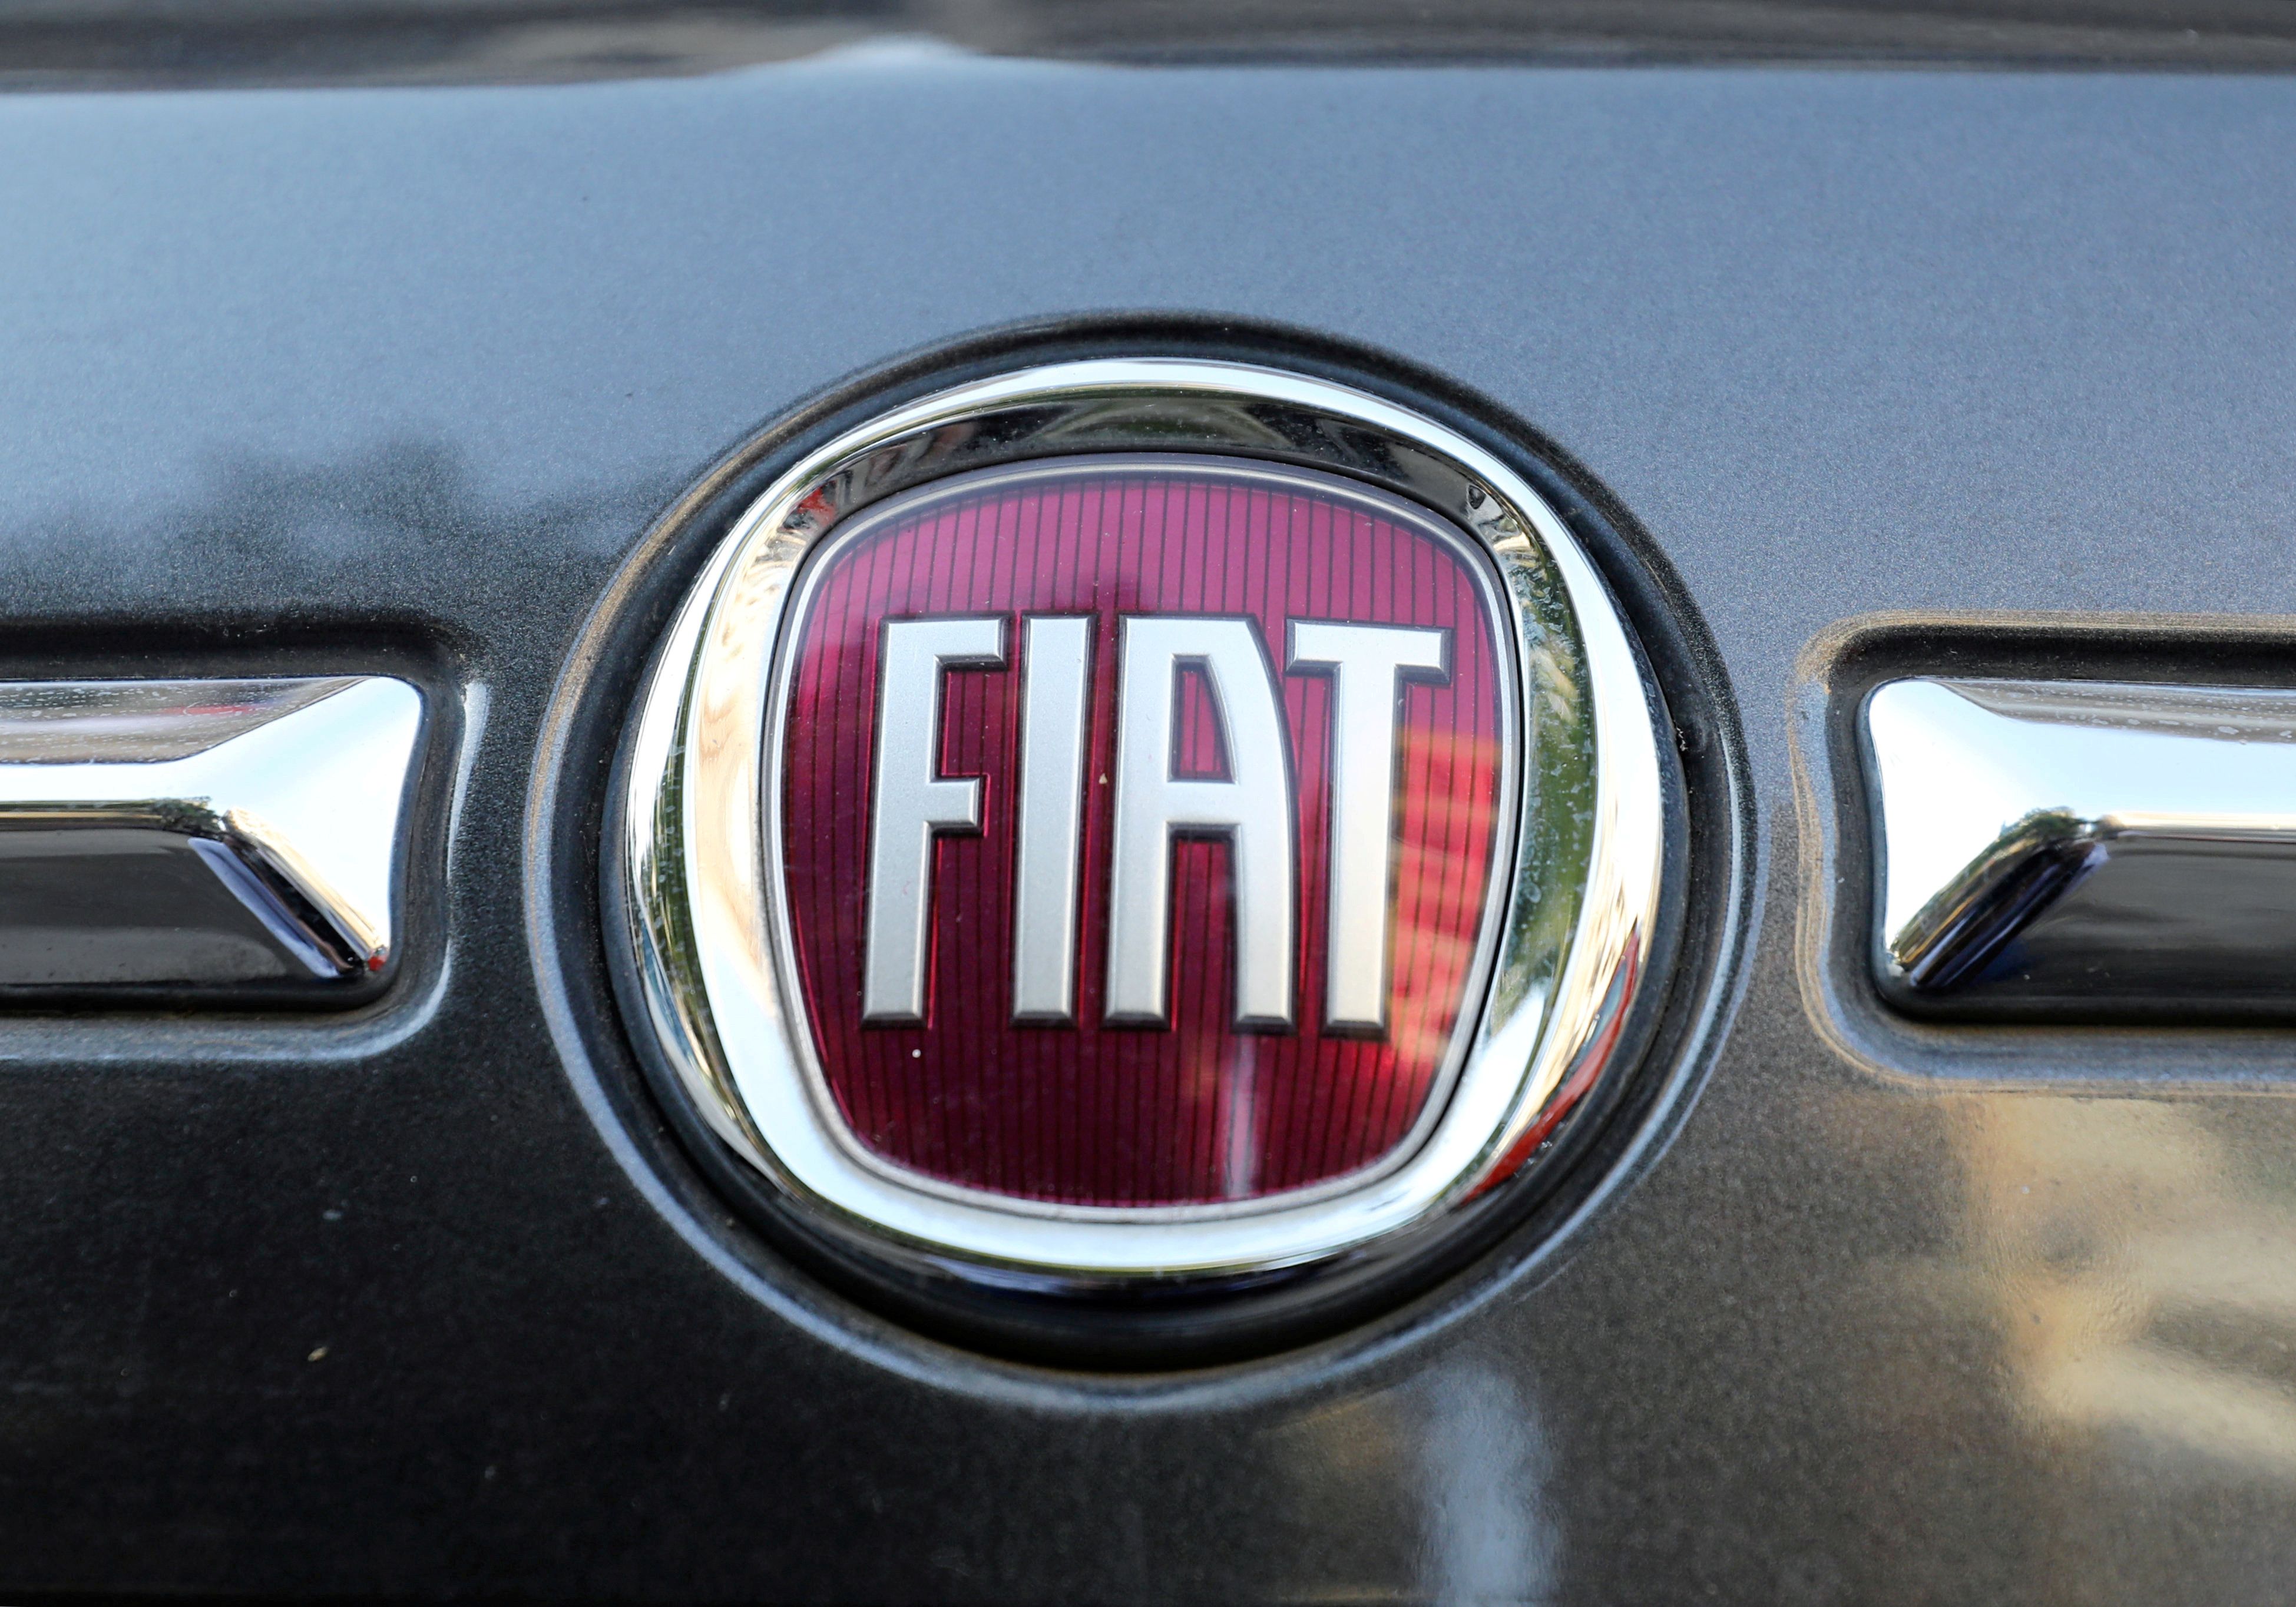 Fiat Chrysler is withdrawing merger proposal for Renault: Reports